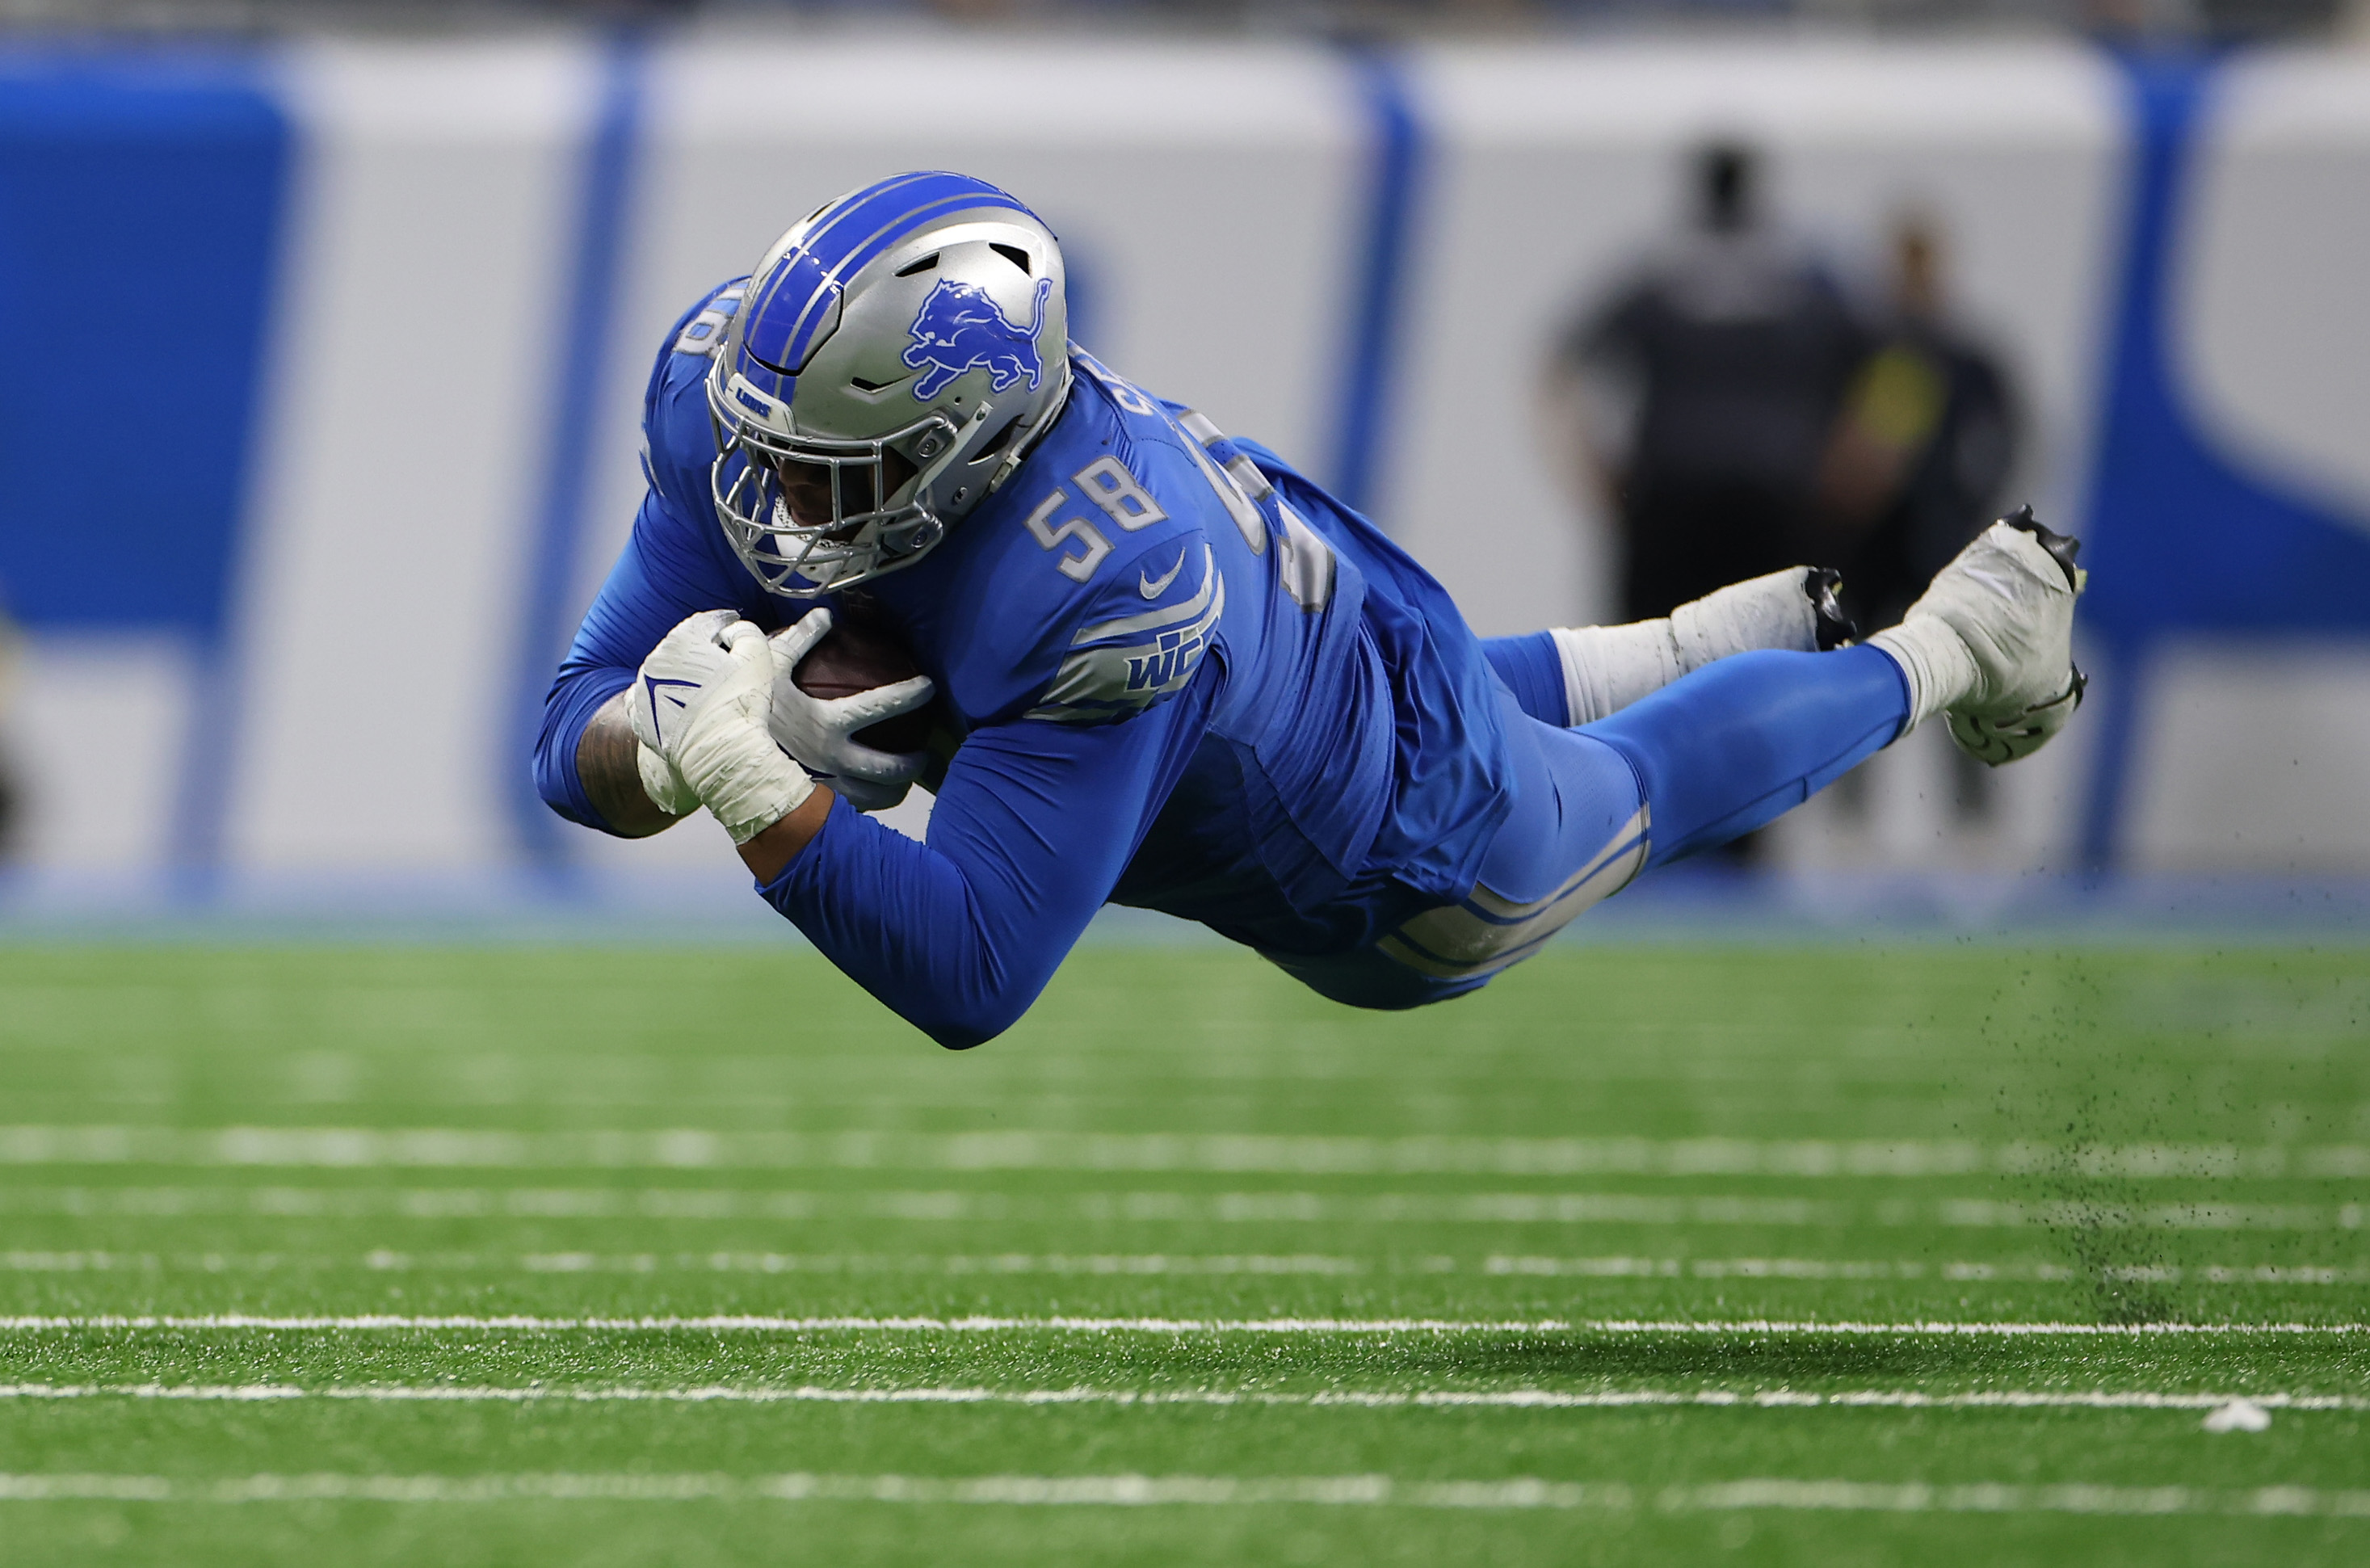 Lions OT Penei Sewell flying fairly gracefully through the air after making a reception against the Vikings in a Detroit win.